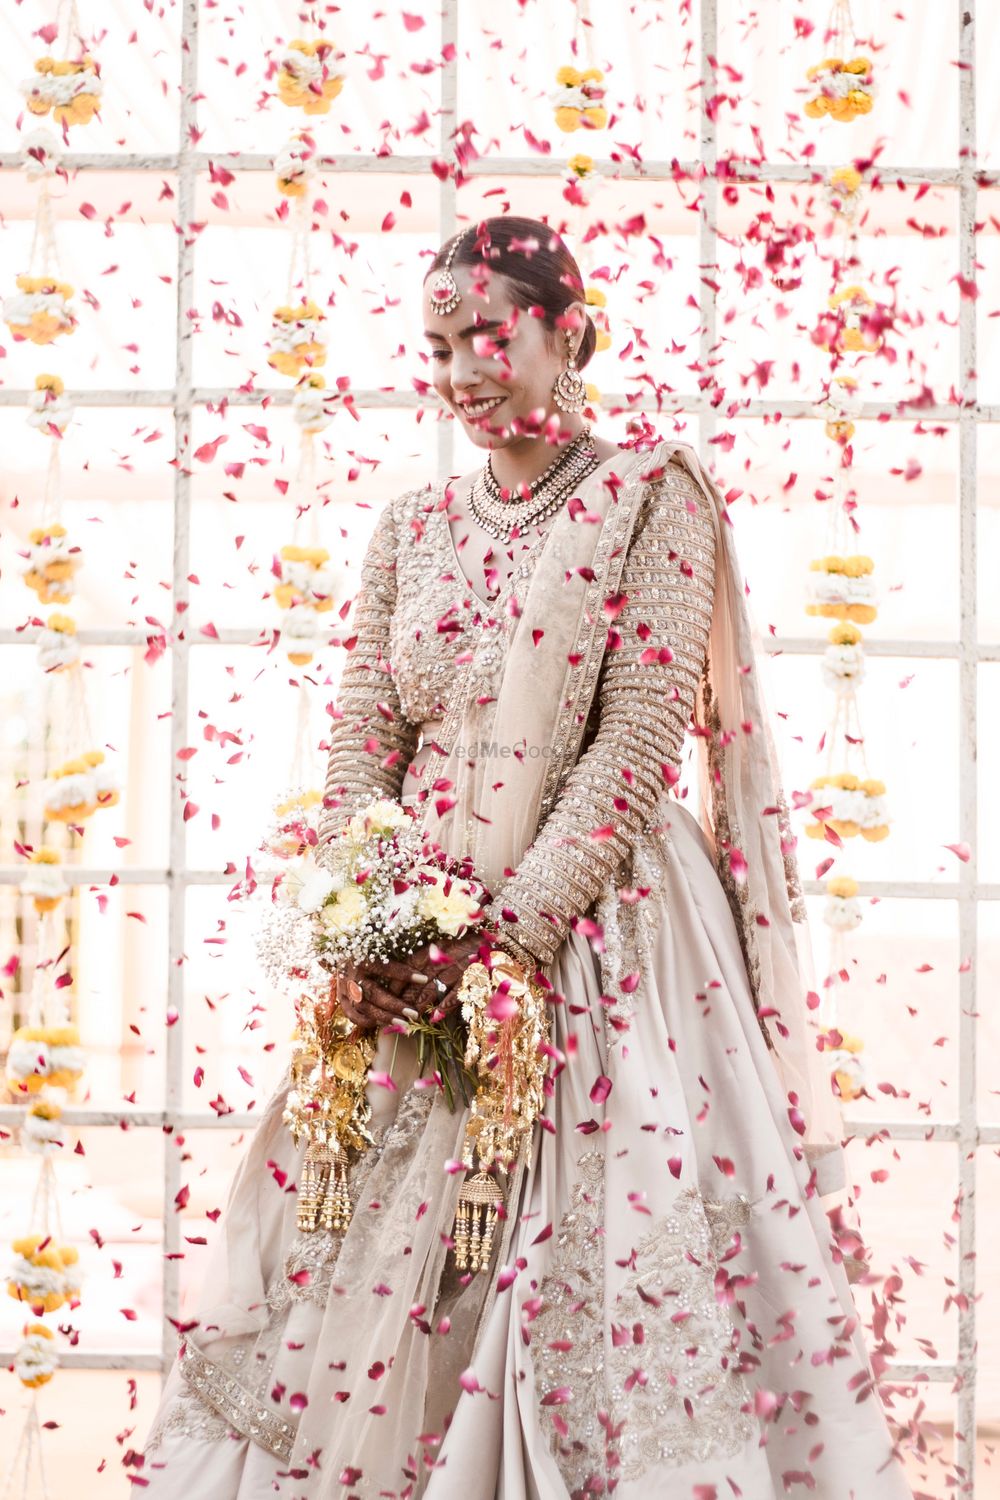 Photo of Pretty bridal portrait with petals thrown